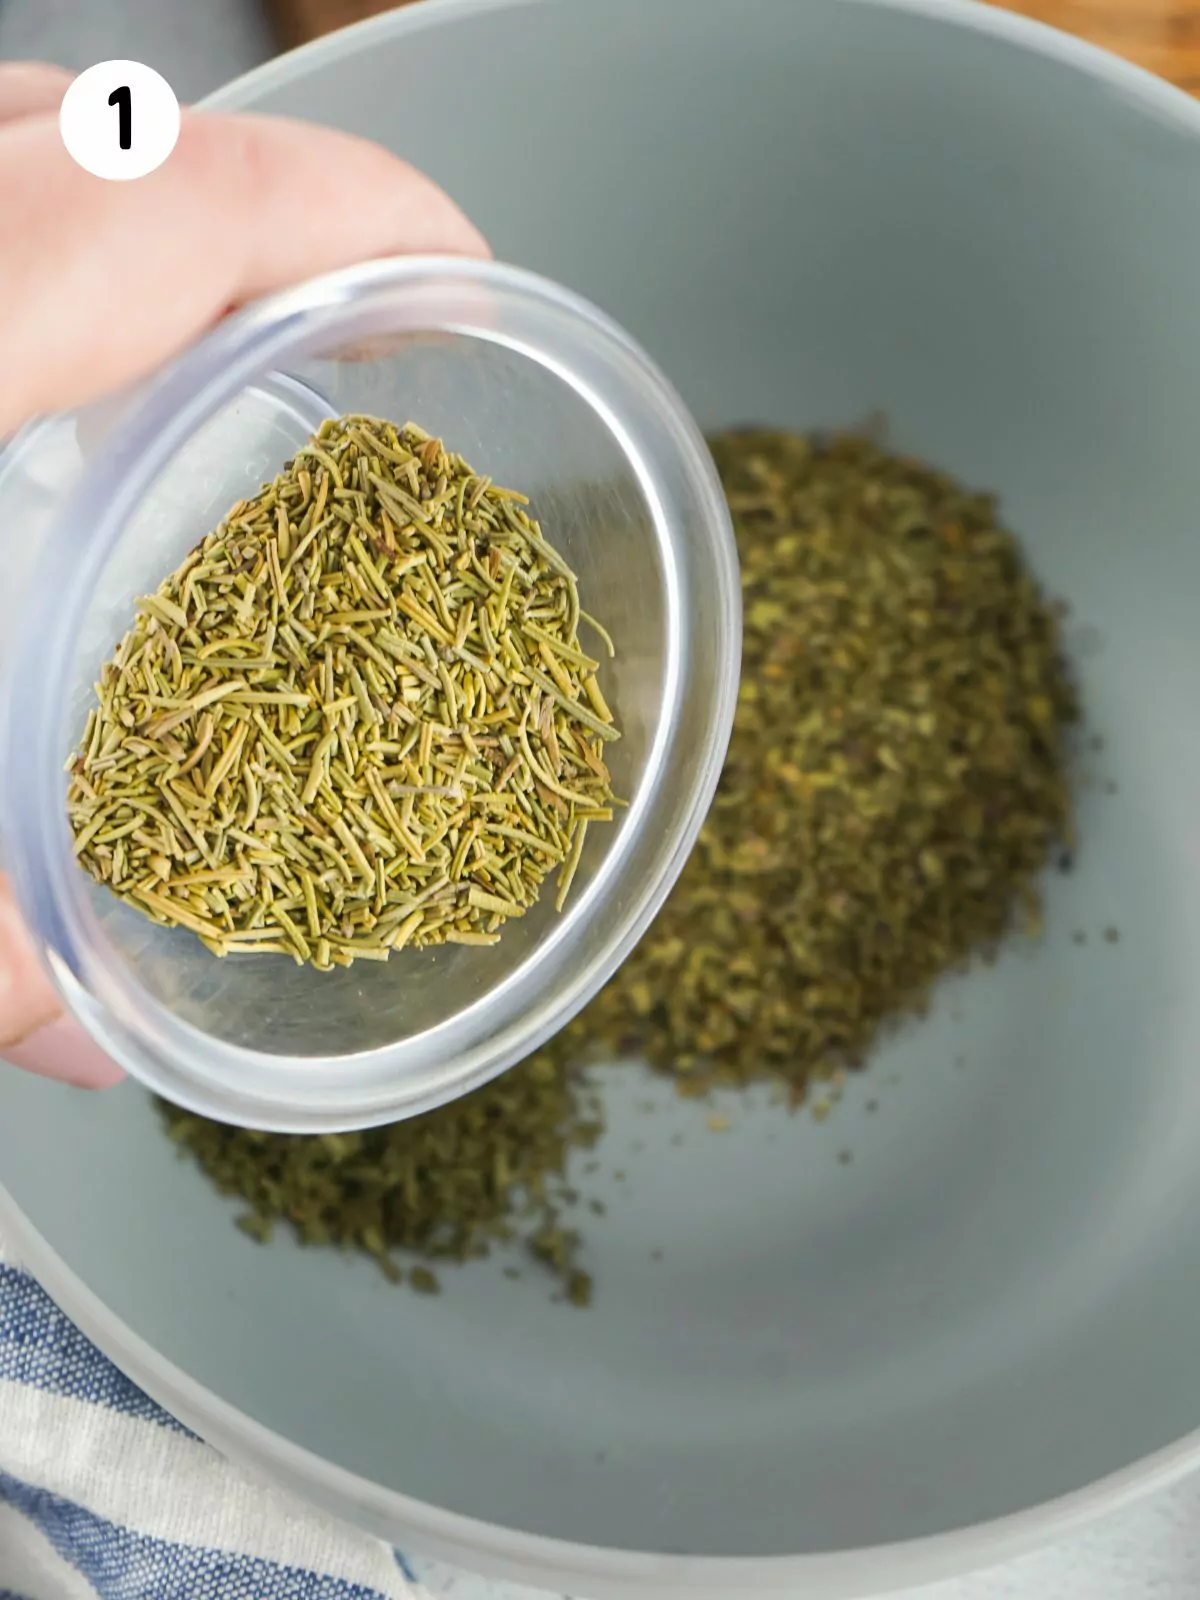 dried rosemary in plastic container over small bowl.